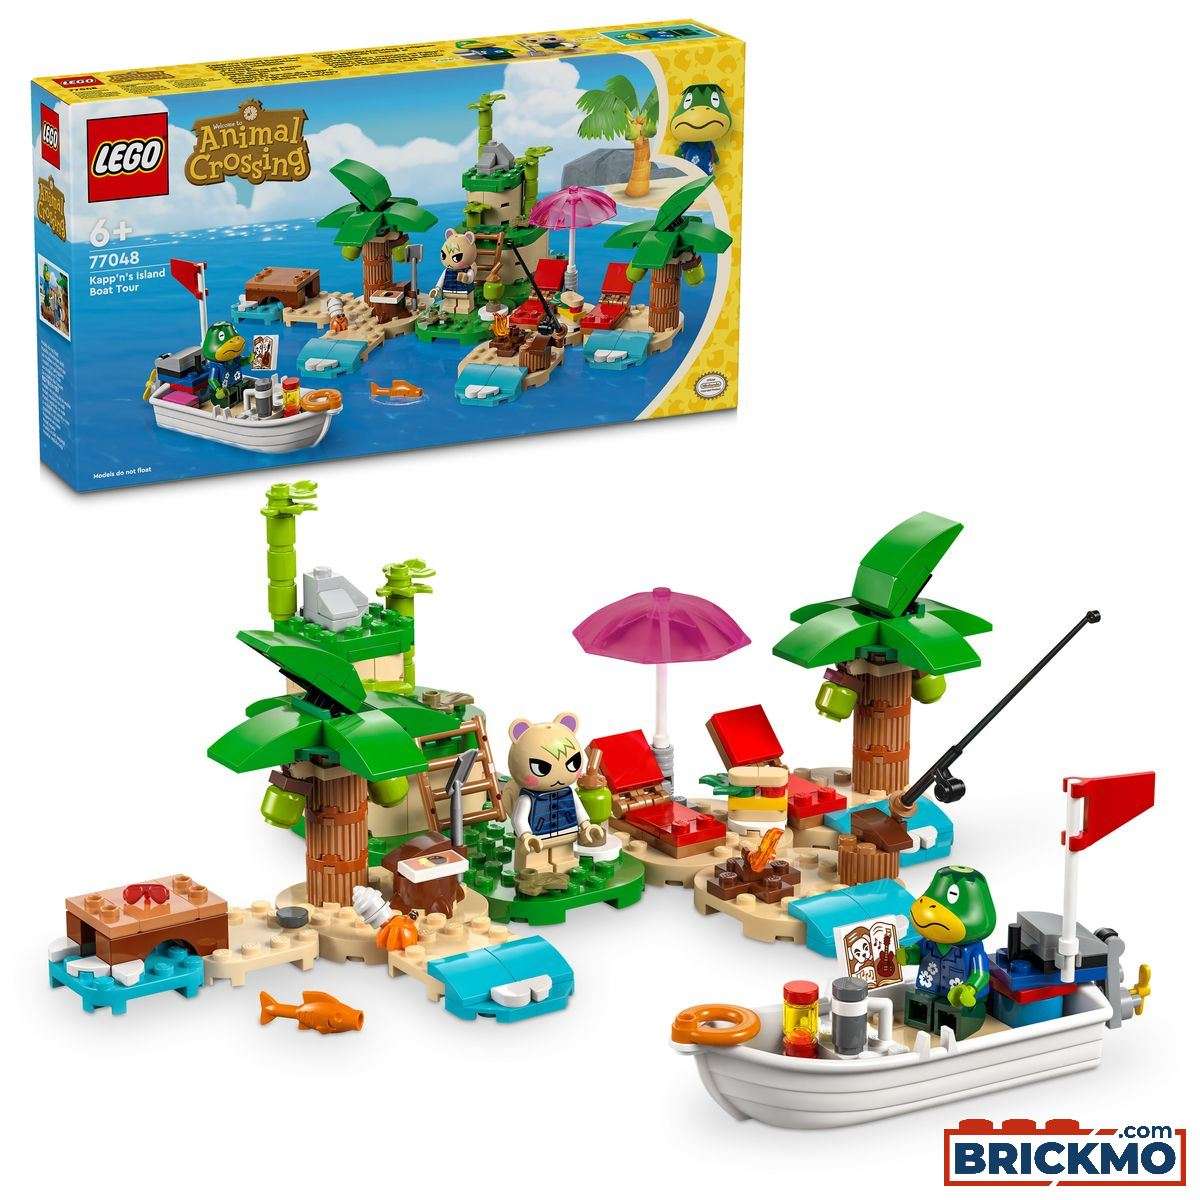 LEGO Animal Crossing 77048 Käptens Insel-Bootstour 77048